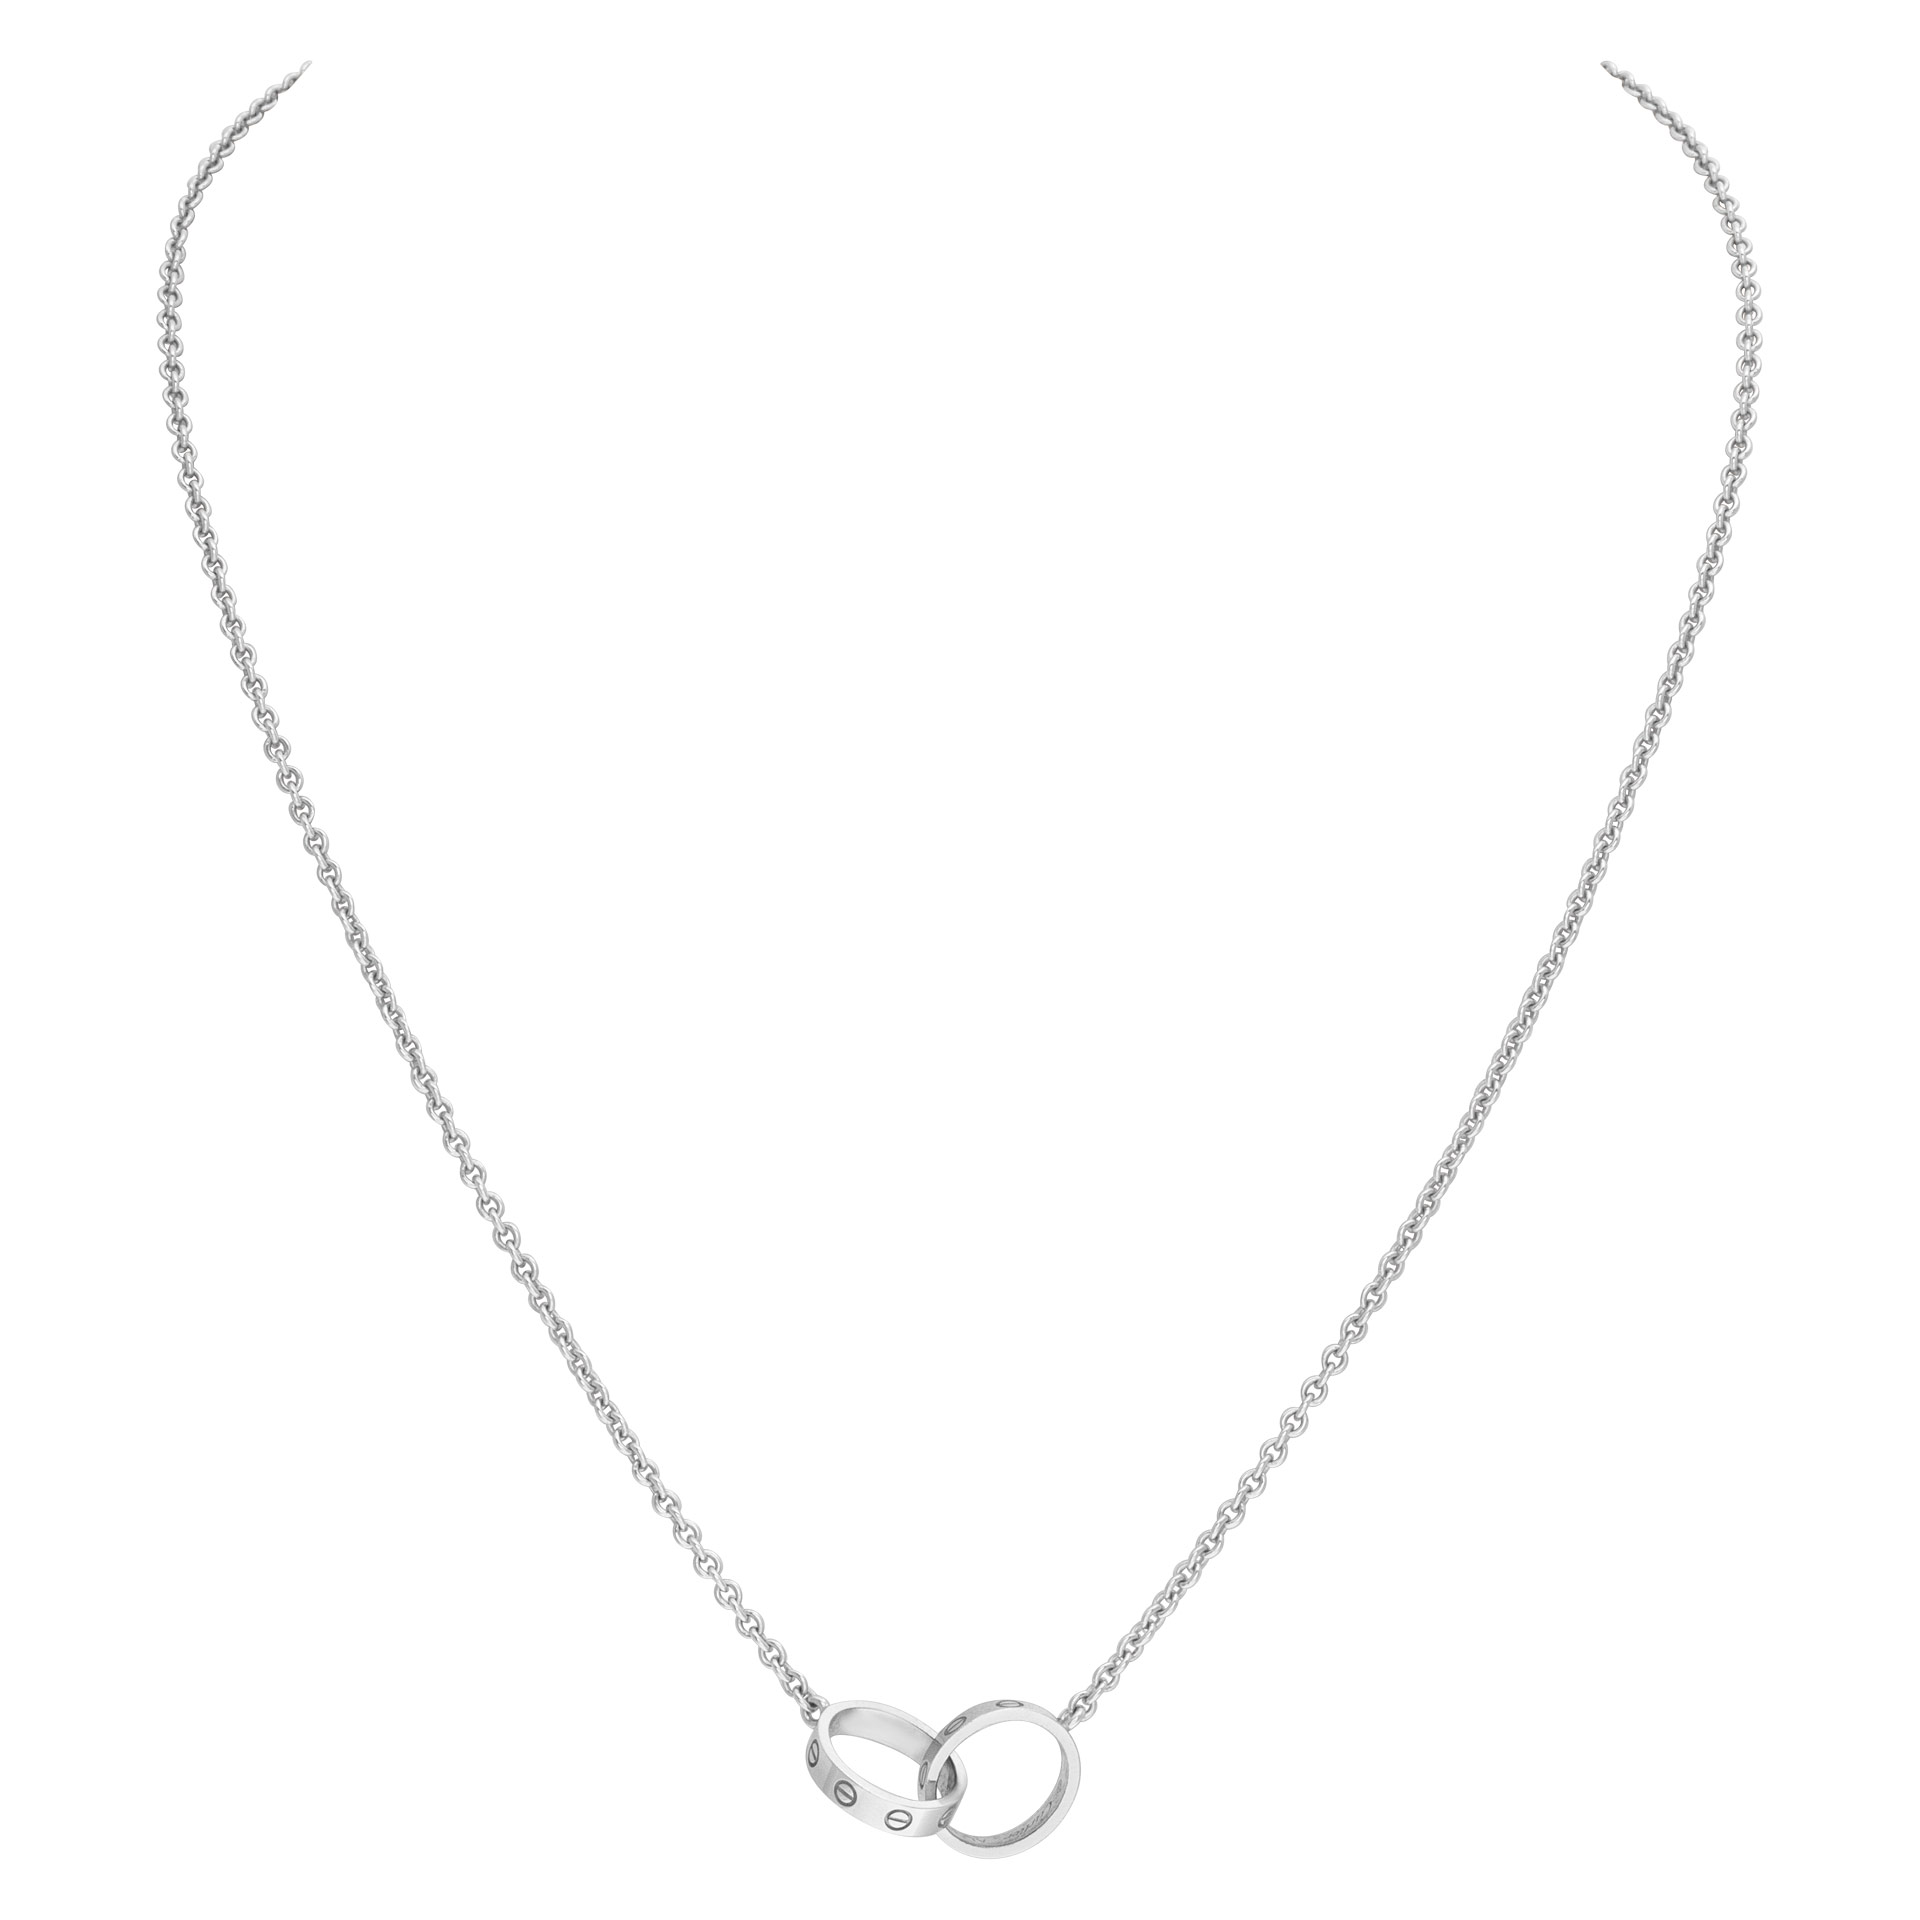 Cartier Love necklace in 18k white gold